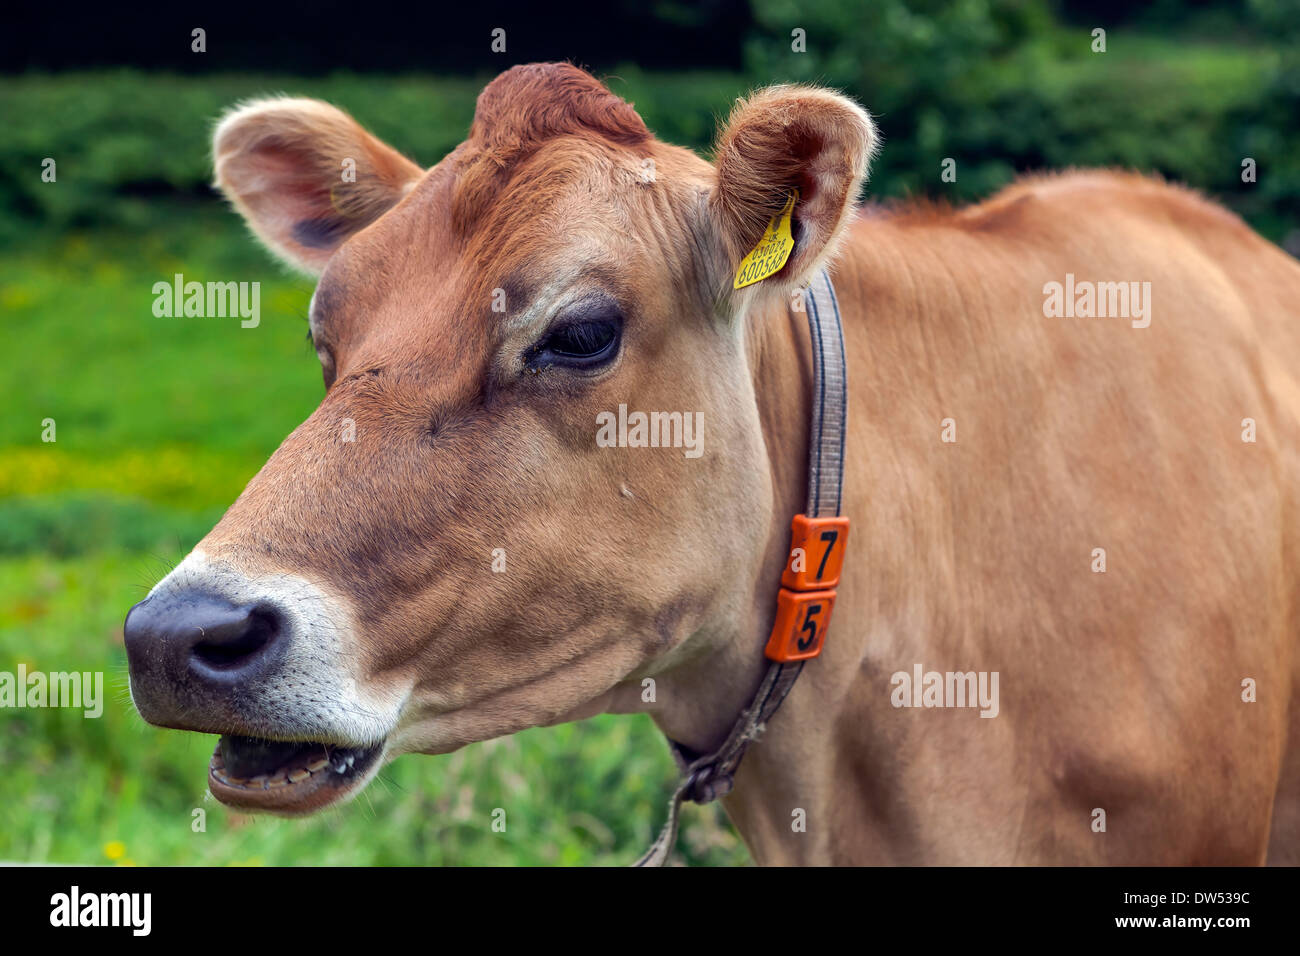 Bovins Jersey Jersey cow Banque D'Images